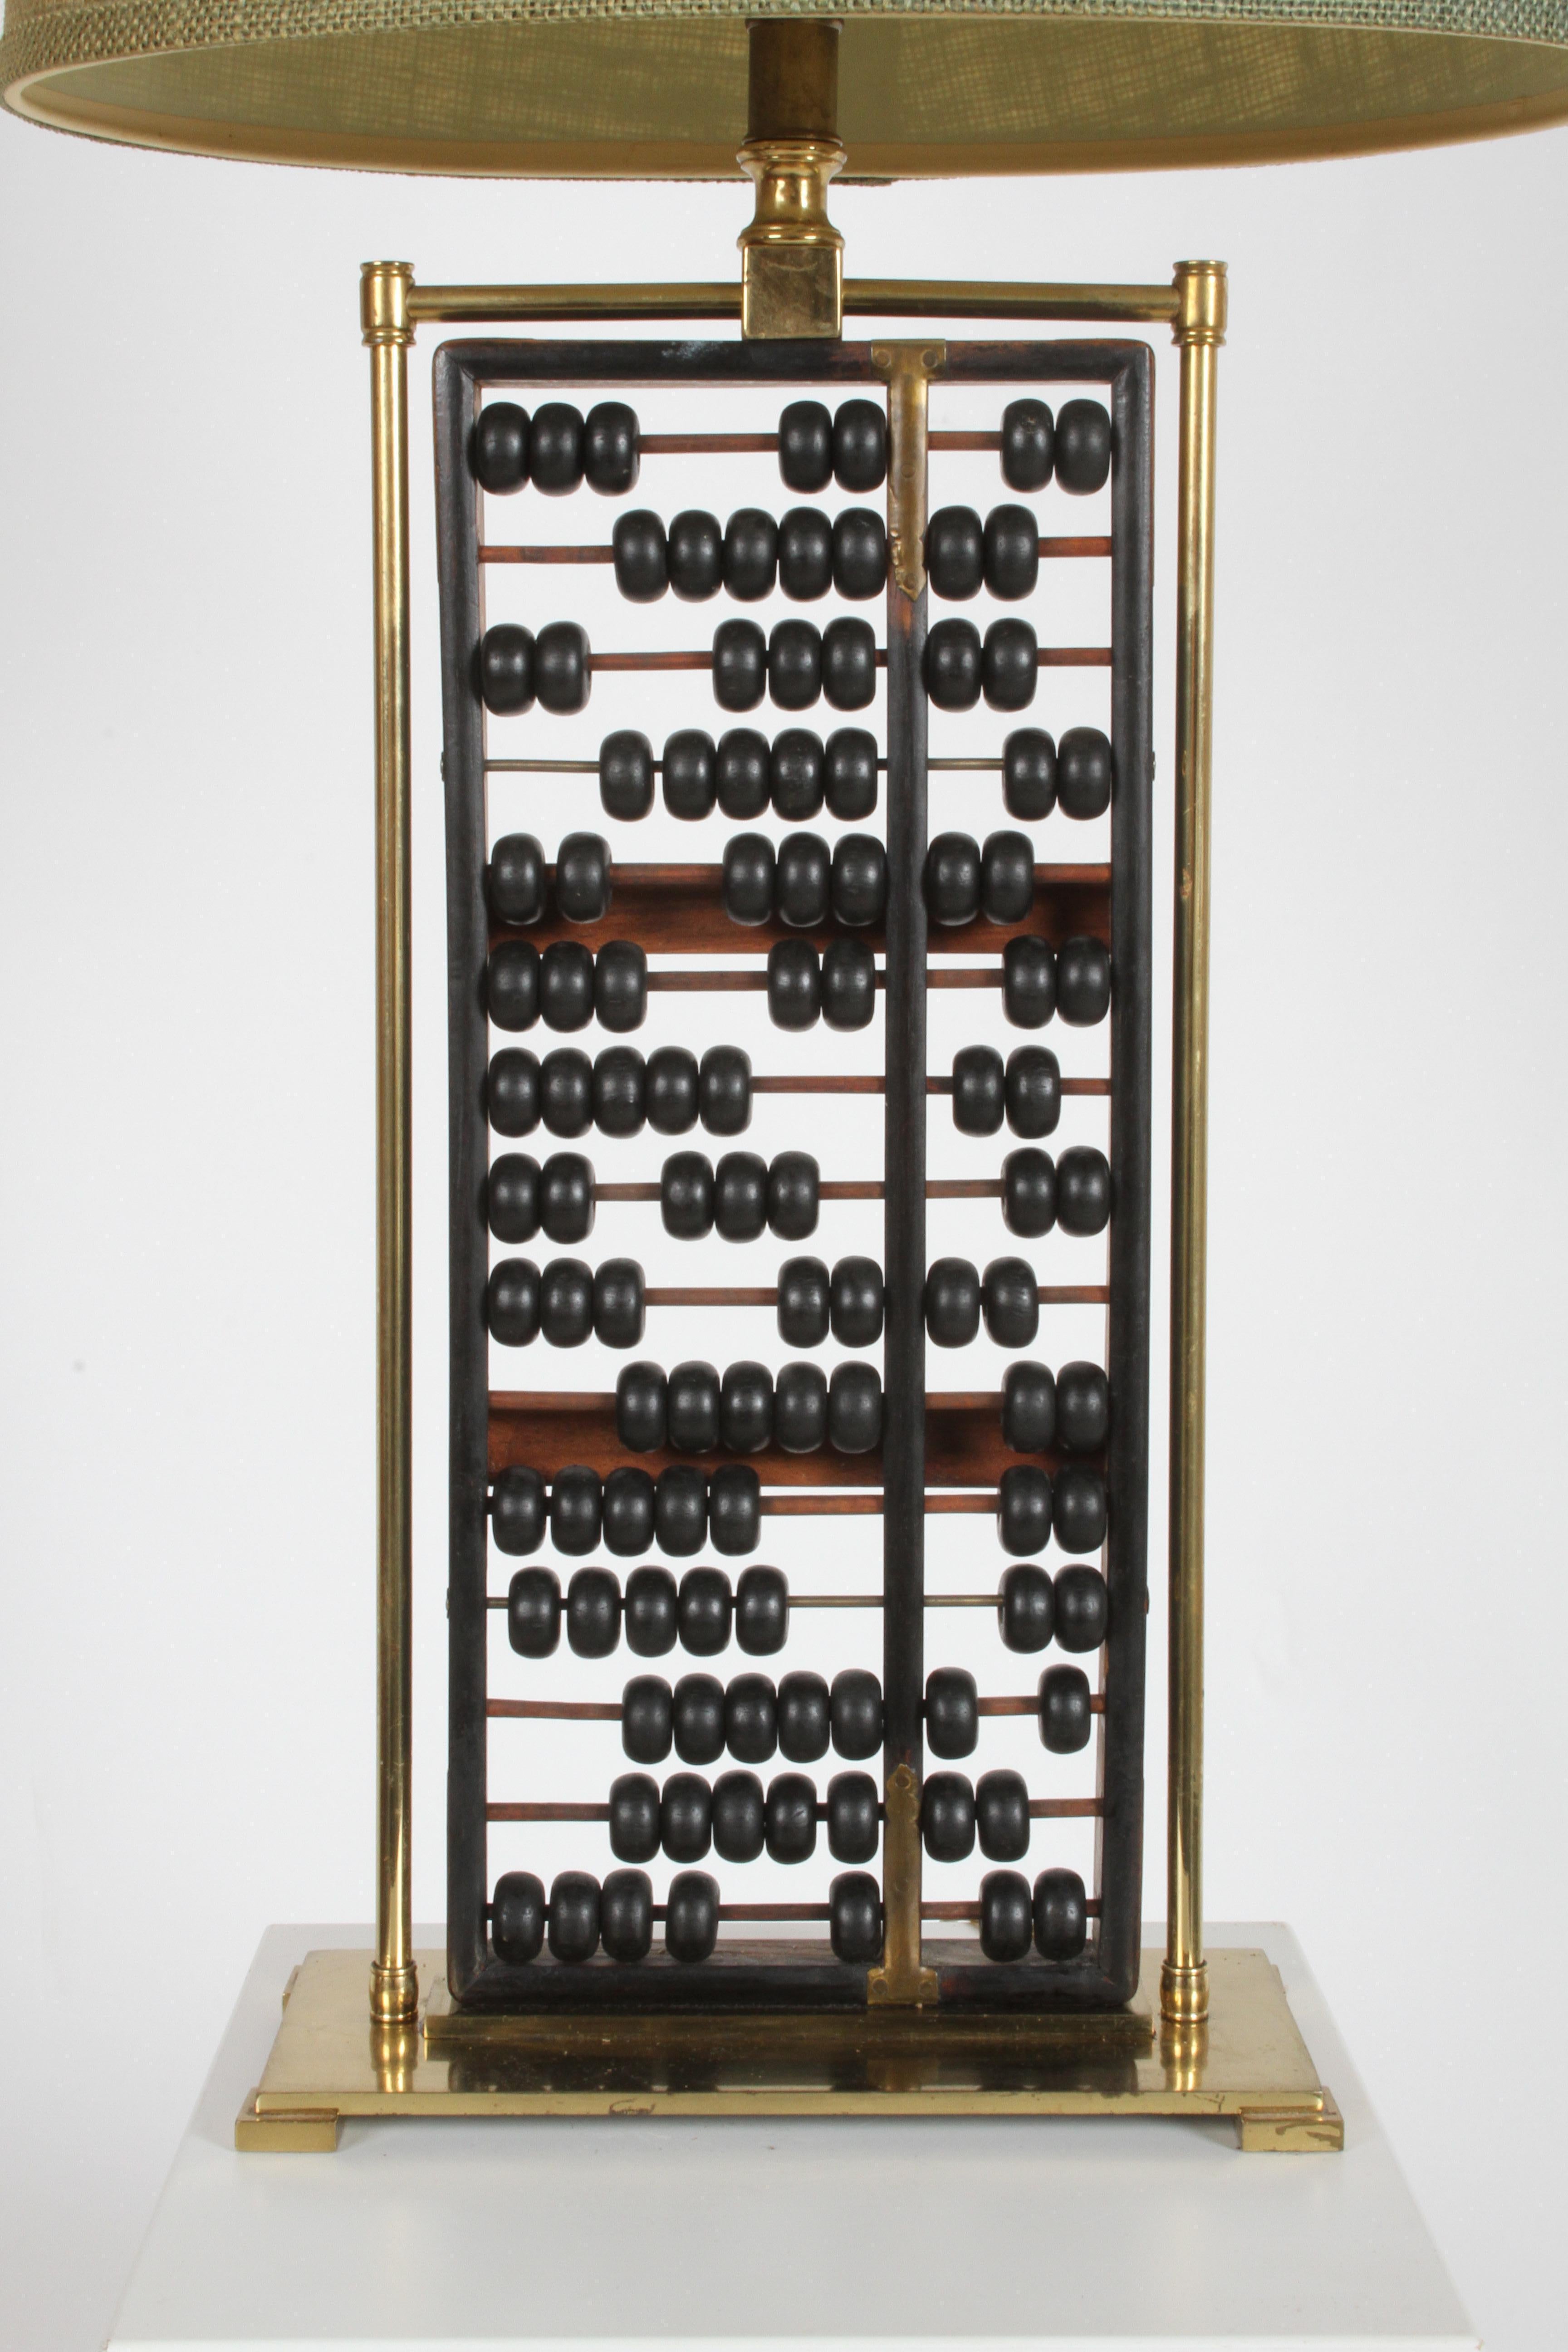 Mid-Century Chinese wood abacus lamp with brass frame, shown with original lamp shade and finial. Has white glass diffuser that holds shade. Newer lamp cord, minor wear to brass. Measurements shown below are with shade. Measurements without shade